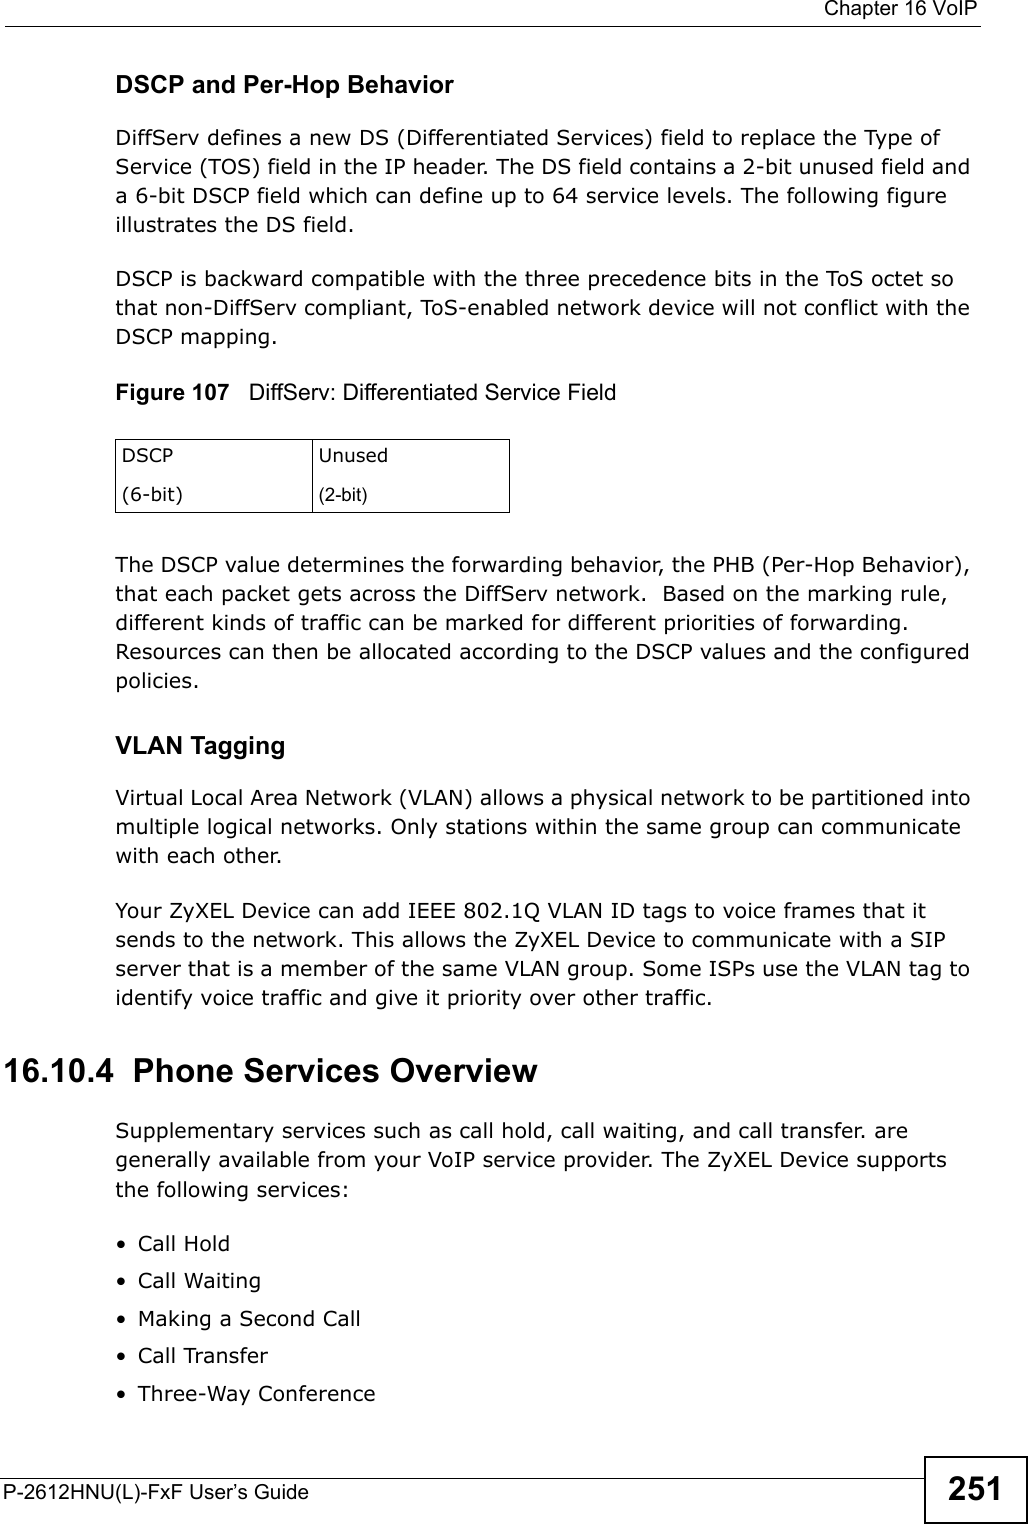  Chapter 16 VoIPP-2612HNU(L)-FxF User’s Guide 251DSCP and Per-Hop Behavior DiffServ defines a new DS (Differentiated Services) field to replace the Type of Service (TOS) field in the IP header. The DS field contains a 2-bit unused field and a 6-bit DSCP field which can define up to 64 service levels. The following figure illustrates the DS field. DSCP is backward compatible with the three precedence bits in the ToS octet sothat non-DiffServ compliant, ToS-enabled network device will not conflict with the DSCP mapping. Figure 107   DiffServ: Differentiated Service FieldThe DSCP value determines the forwarding behavior, the PHB (Per-Hop Behavior), that each packet gets across the DiffServ network.  Based on the marking rule,different kinds of traffic can be marked for different priorities of forwarding. Resources can then be allocated according to the DSCP values and the configuredpolicies.VLAN TaggingVirtual Local Area Network (VLAN) allows a physical network to be partitioned into multiple logical networks. Only stations within the same group can communicatewith each other.Your ZyXEL Device can add IEEE 802.1Q VLAN ID tags to voice frames that it sends to the network. This allows the ZyXEL Device to communicate with a SIP server that is a member of the same VLAN group. Some ISPs use the VLAN tag to identify voice traffic and give it priority over other traffic.16.10.4  Phone Services OverviewSupplementary services such as call hold, call waiting, and call transfer. are generally available from your VoIP service provider. The ZyXEL Device supports the following services:• Call Hold• Call Waiting• Making a Second Call• Call Transfer• Three-Way ConferenceDSCP(6-bit)Unused(2-bit)